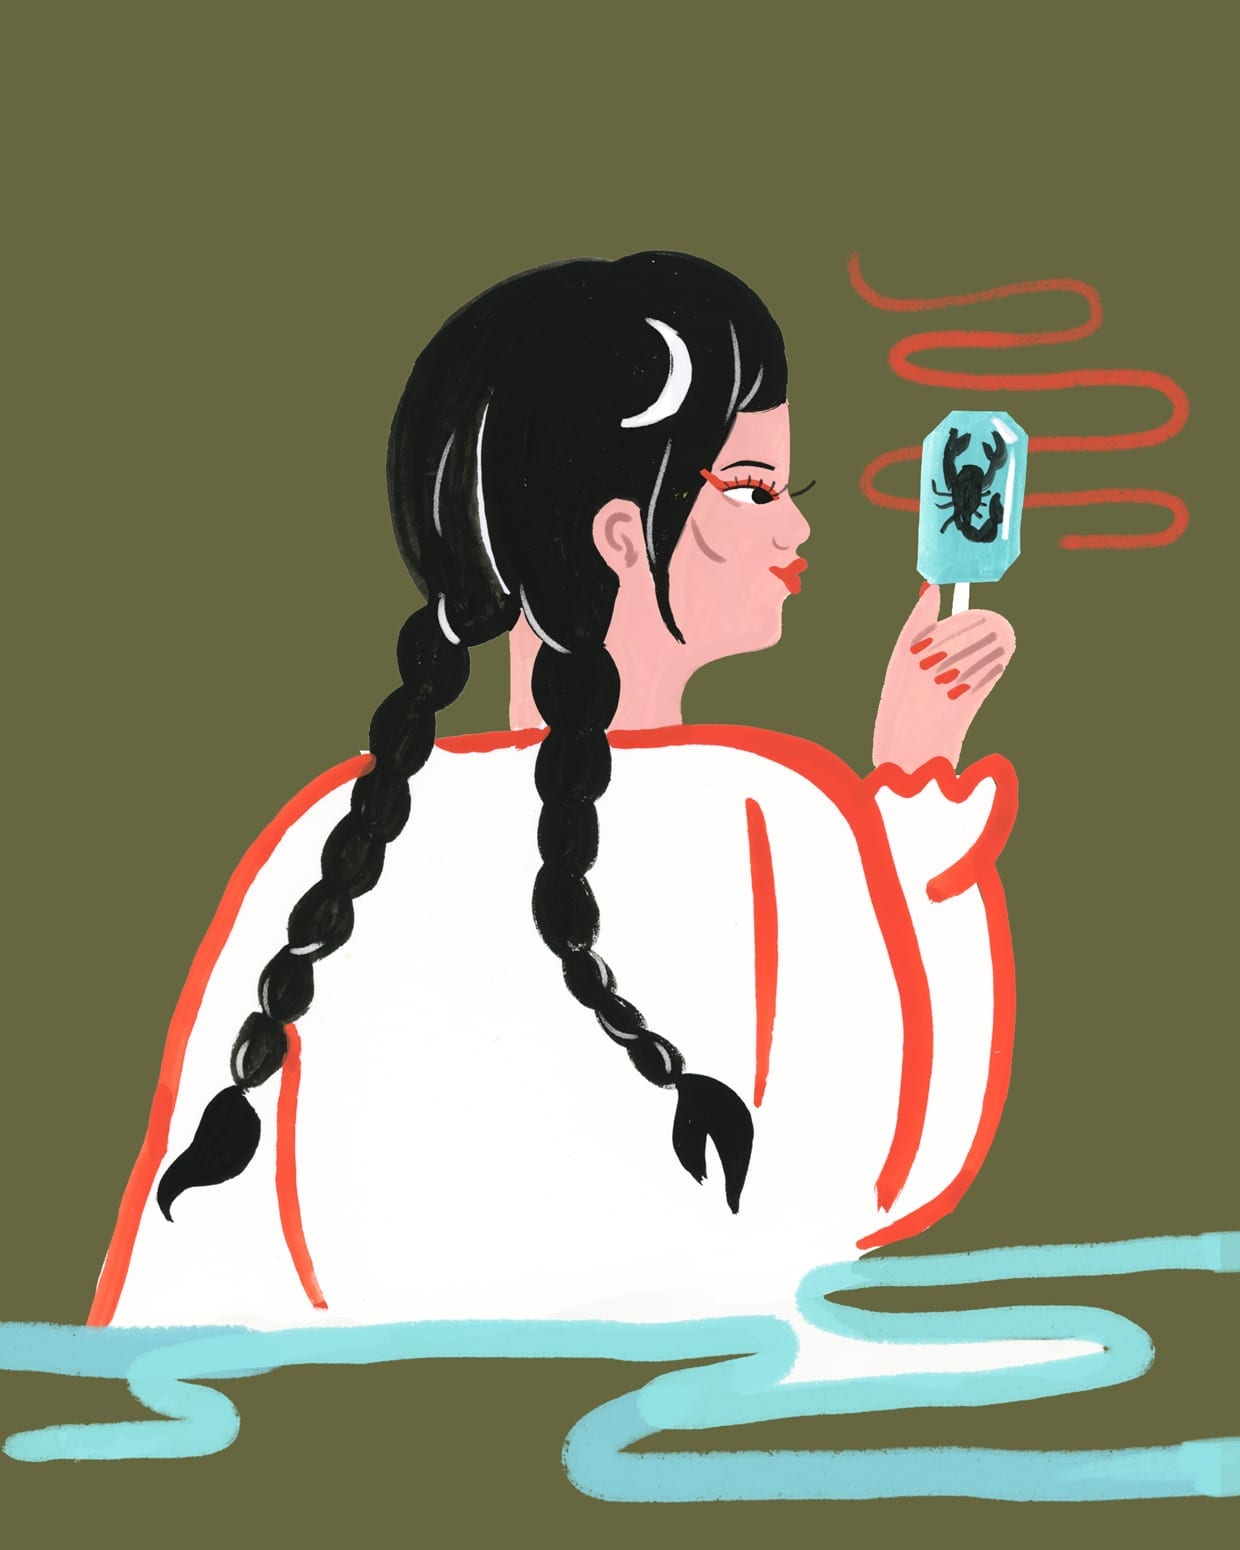 An illustration of a woman holding a scorpion lollipop.